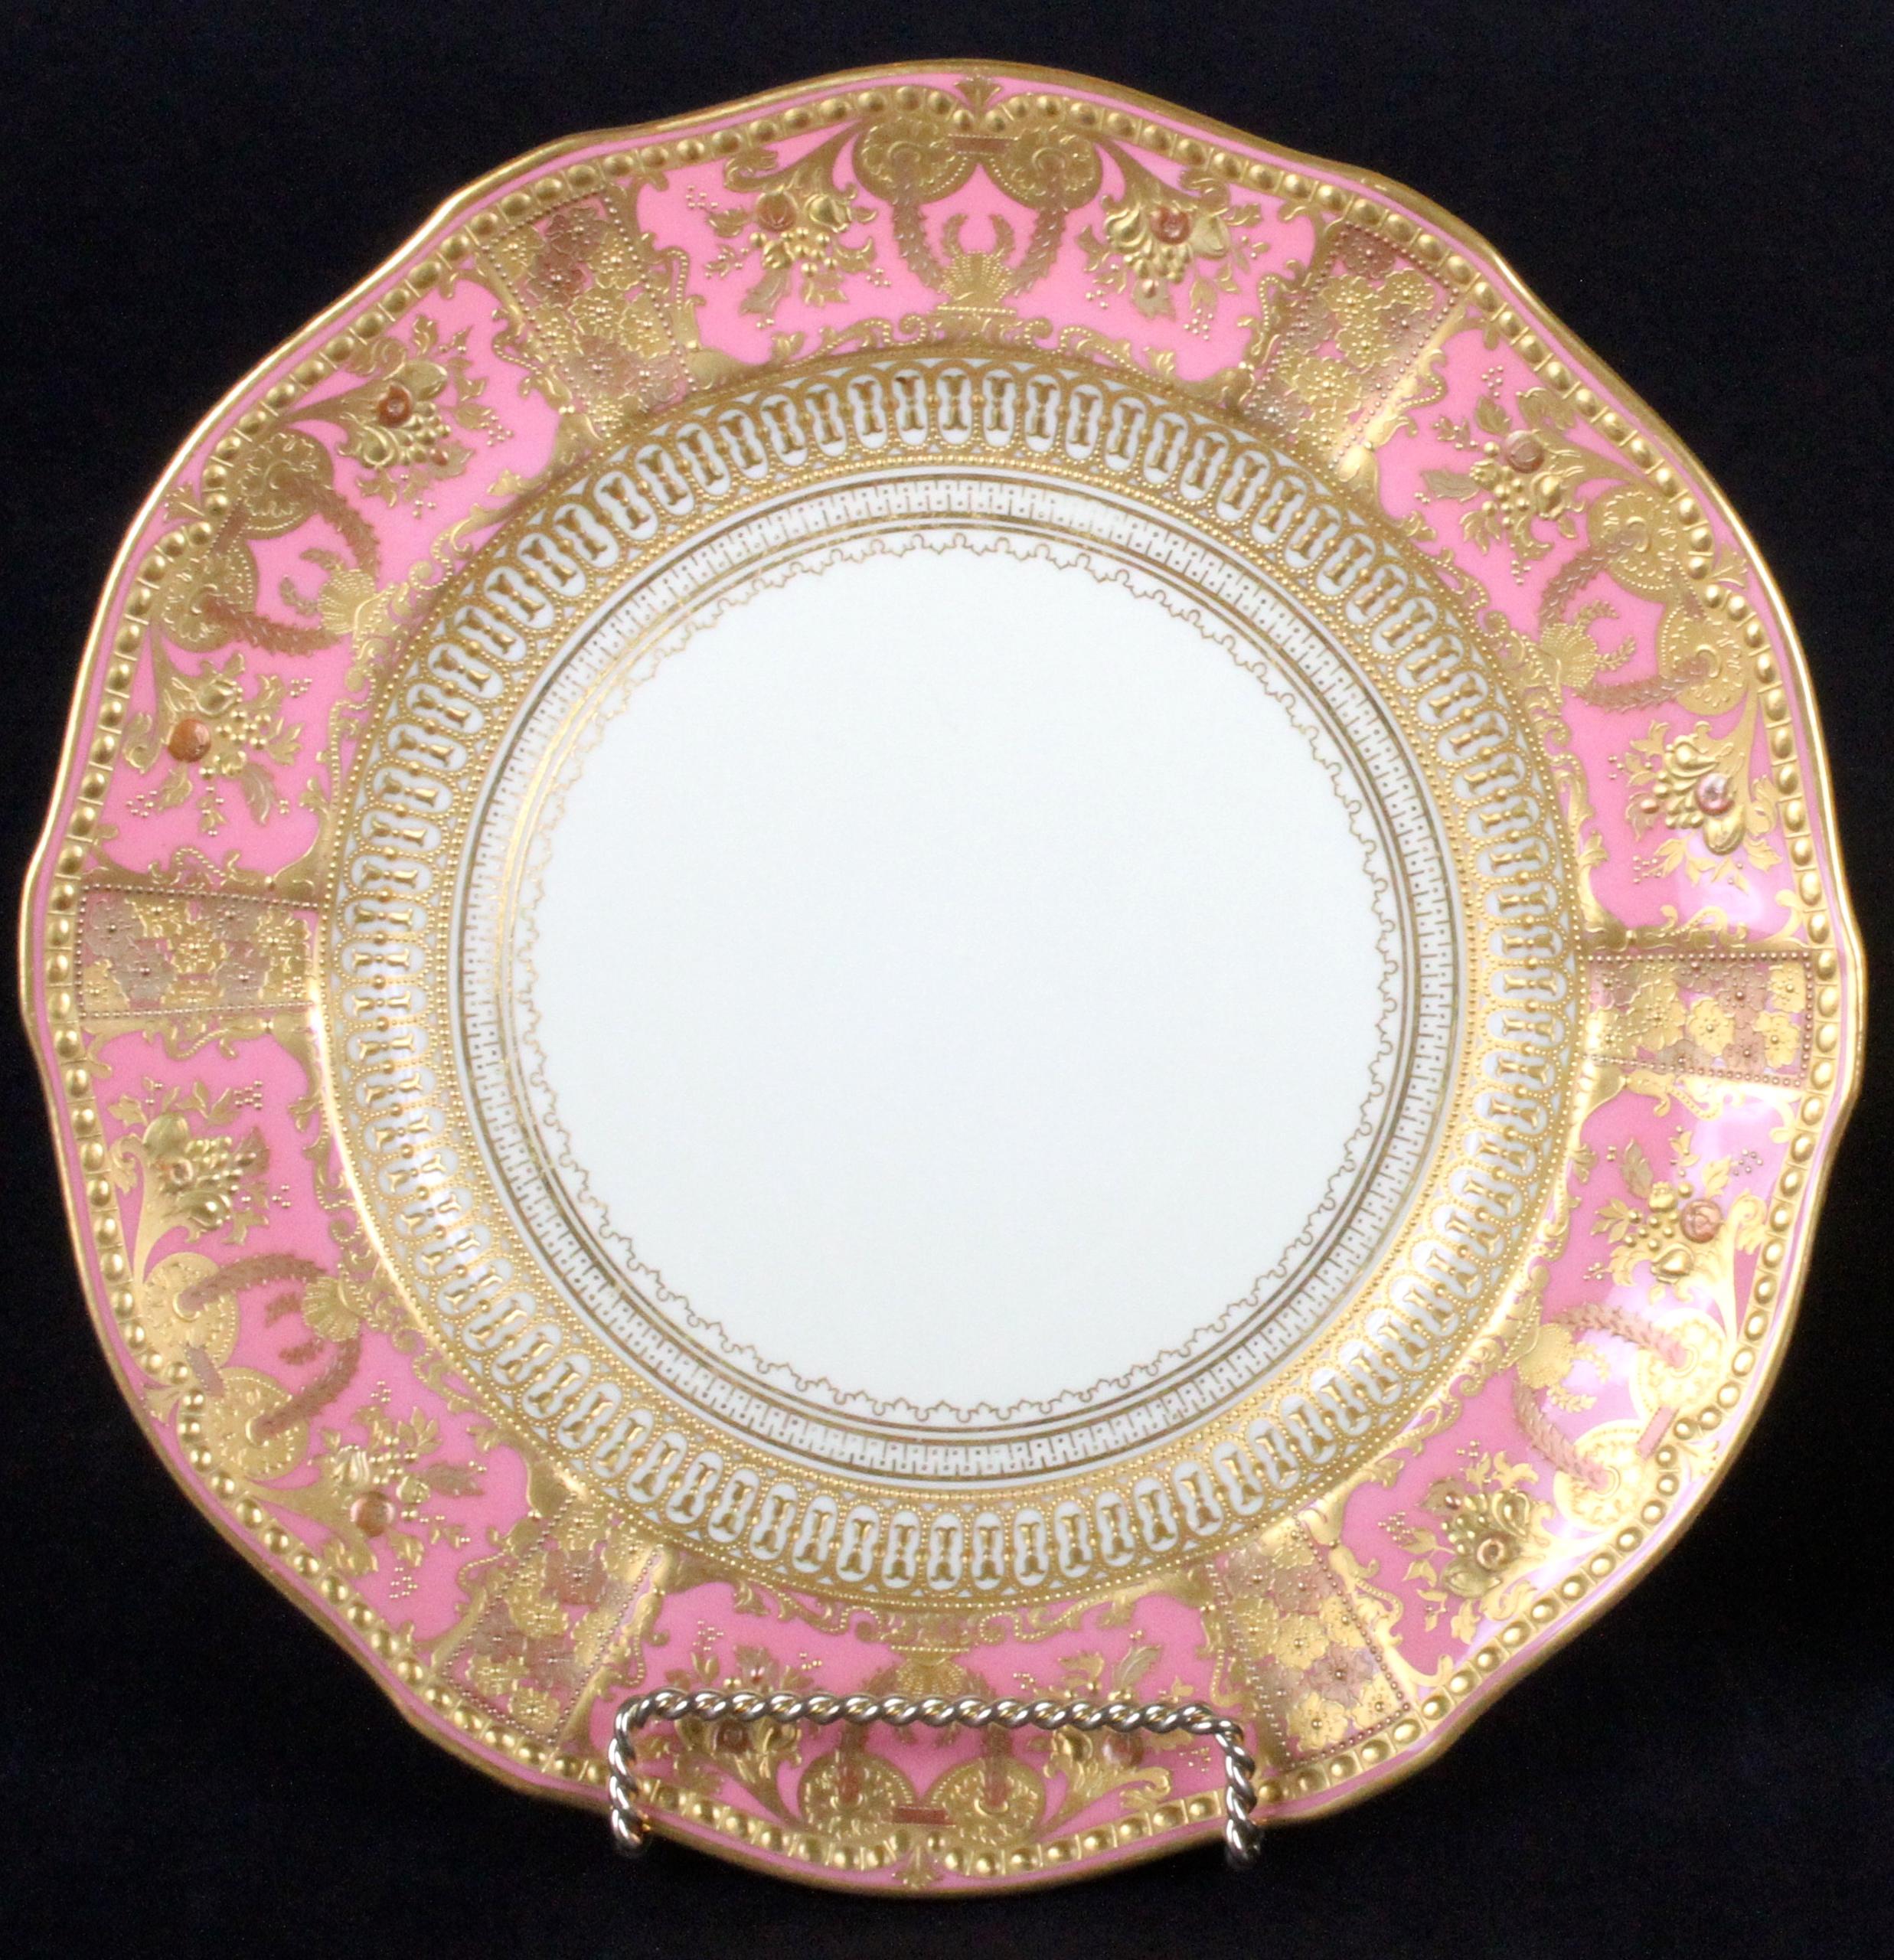 Neoclassical Service of 19th Century Derby Pink Service Plates with Elaborate 2-Color Gilding